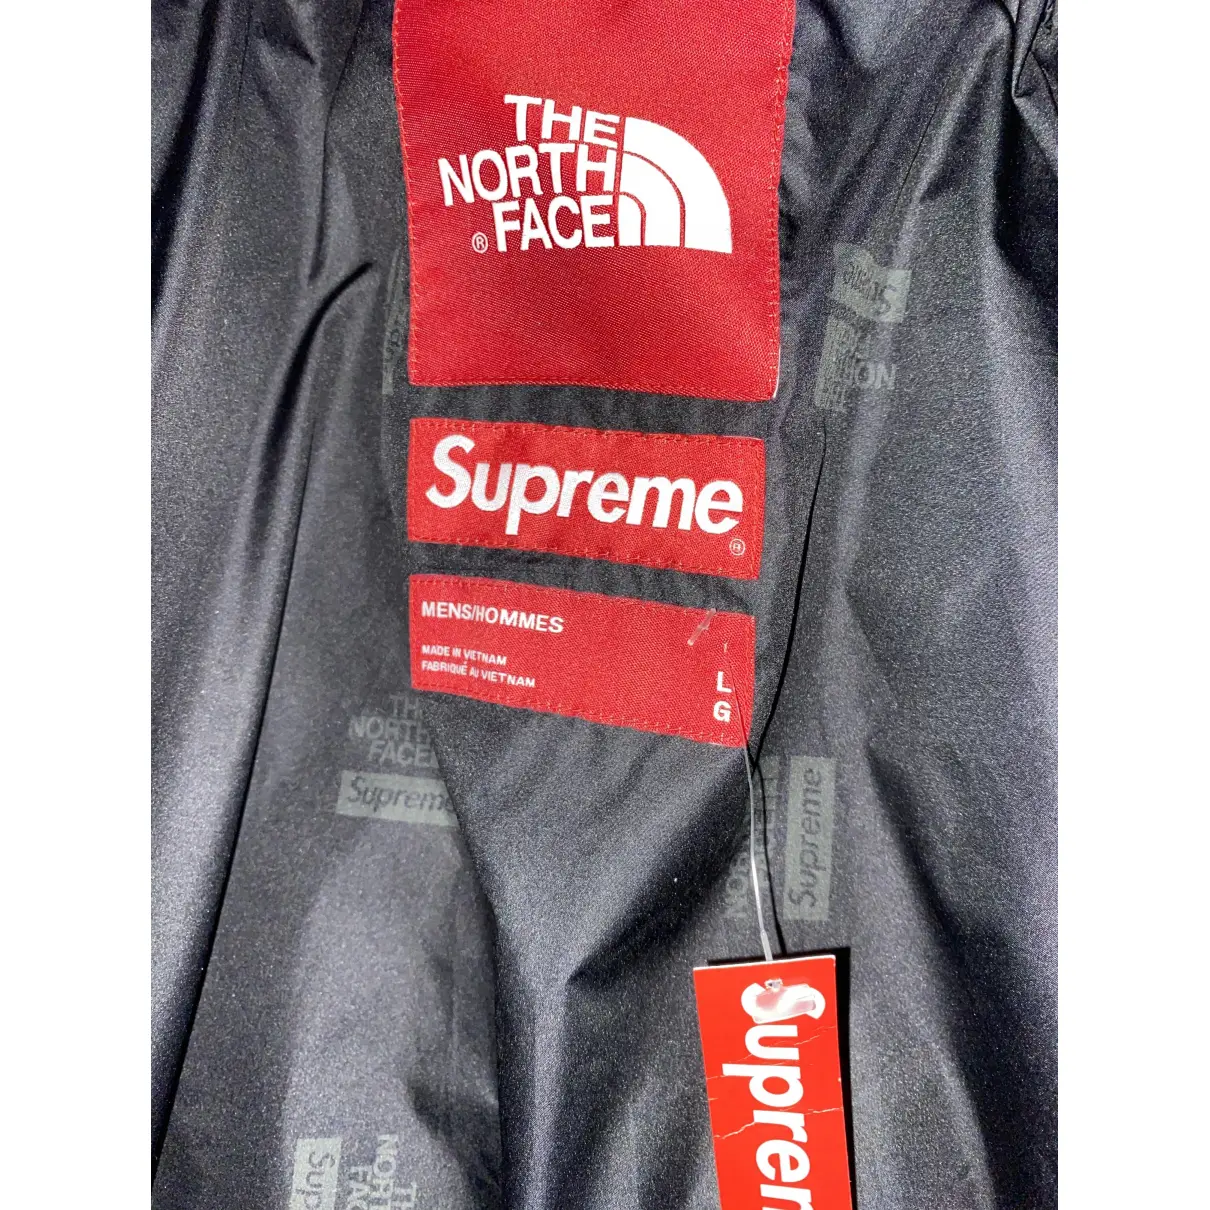 Jacket Supreme x The North Face